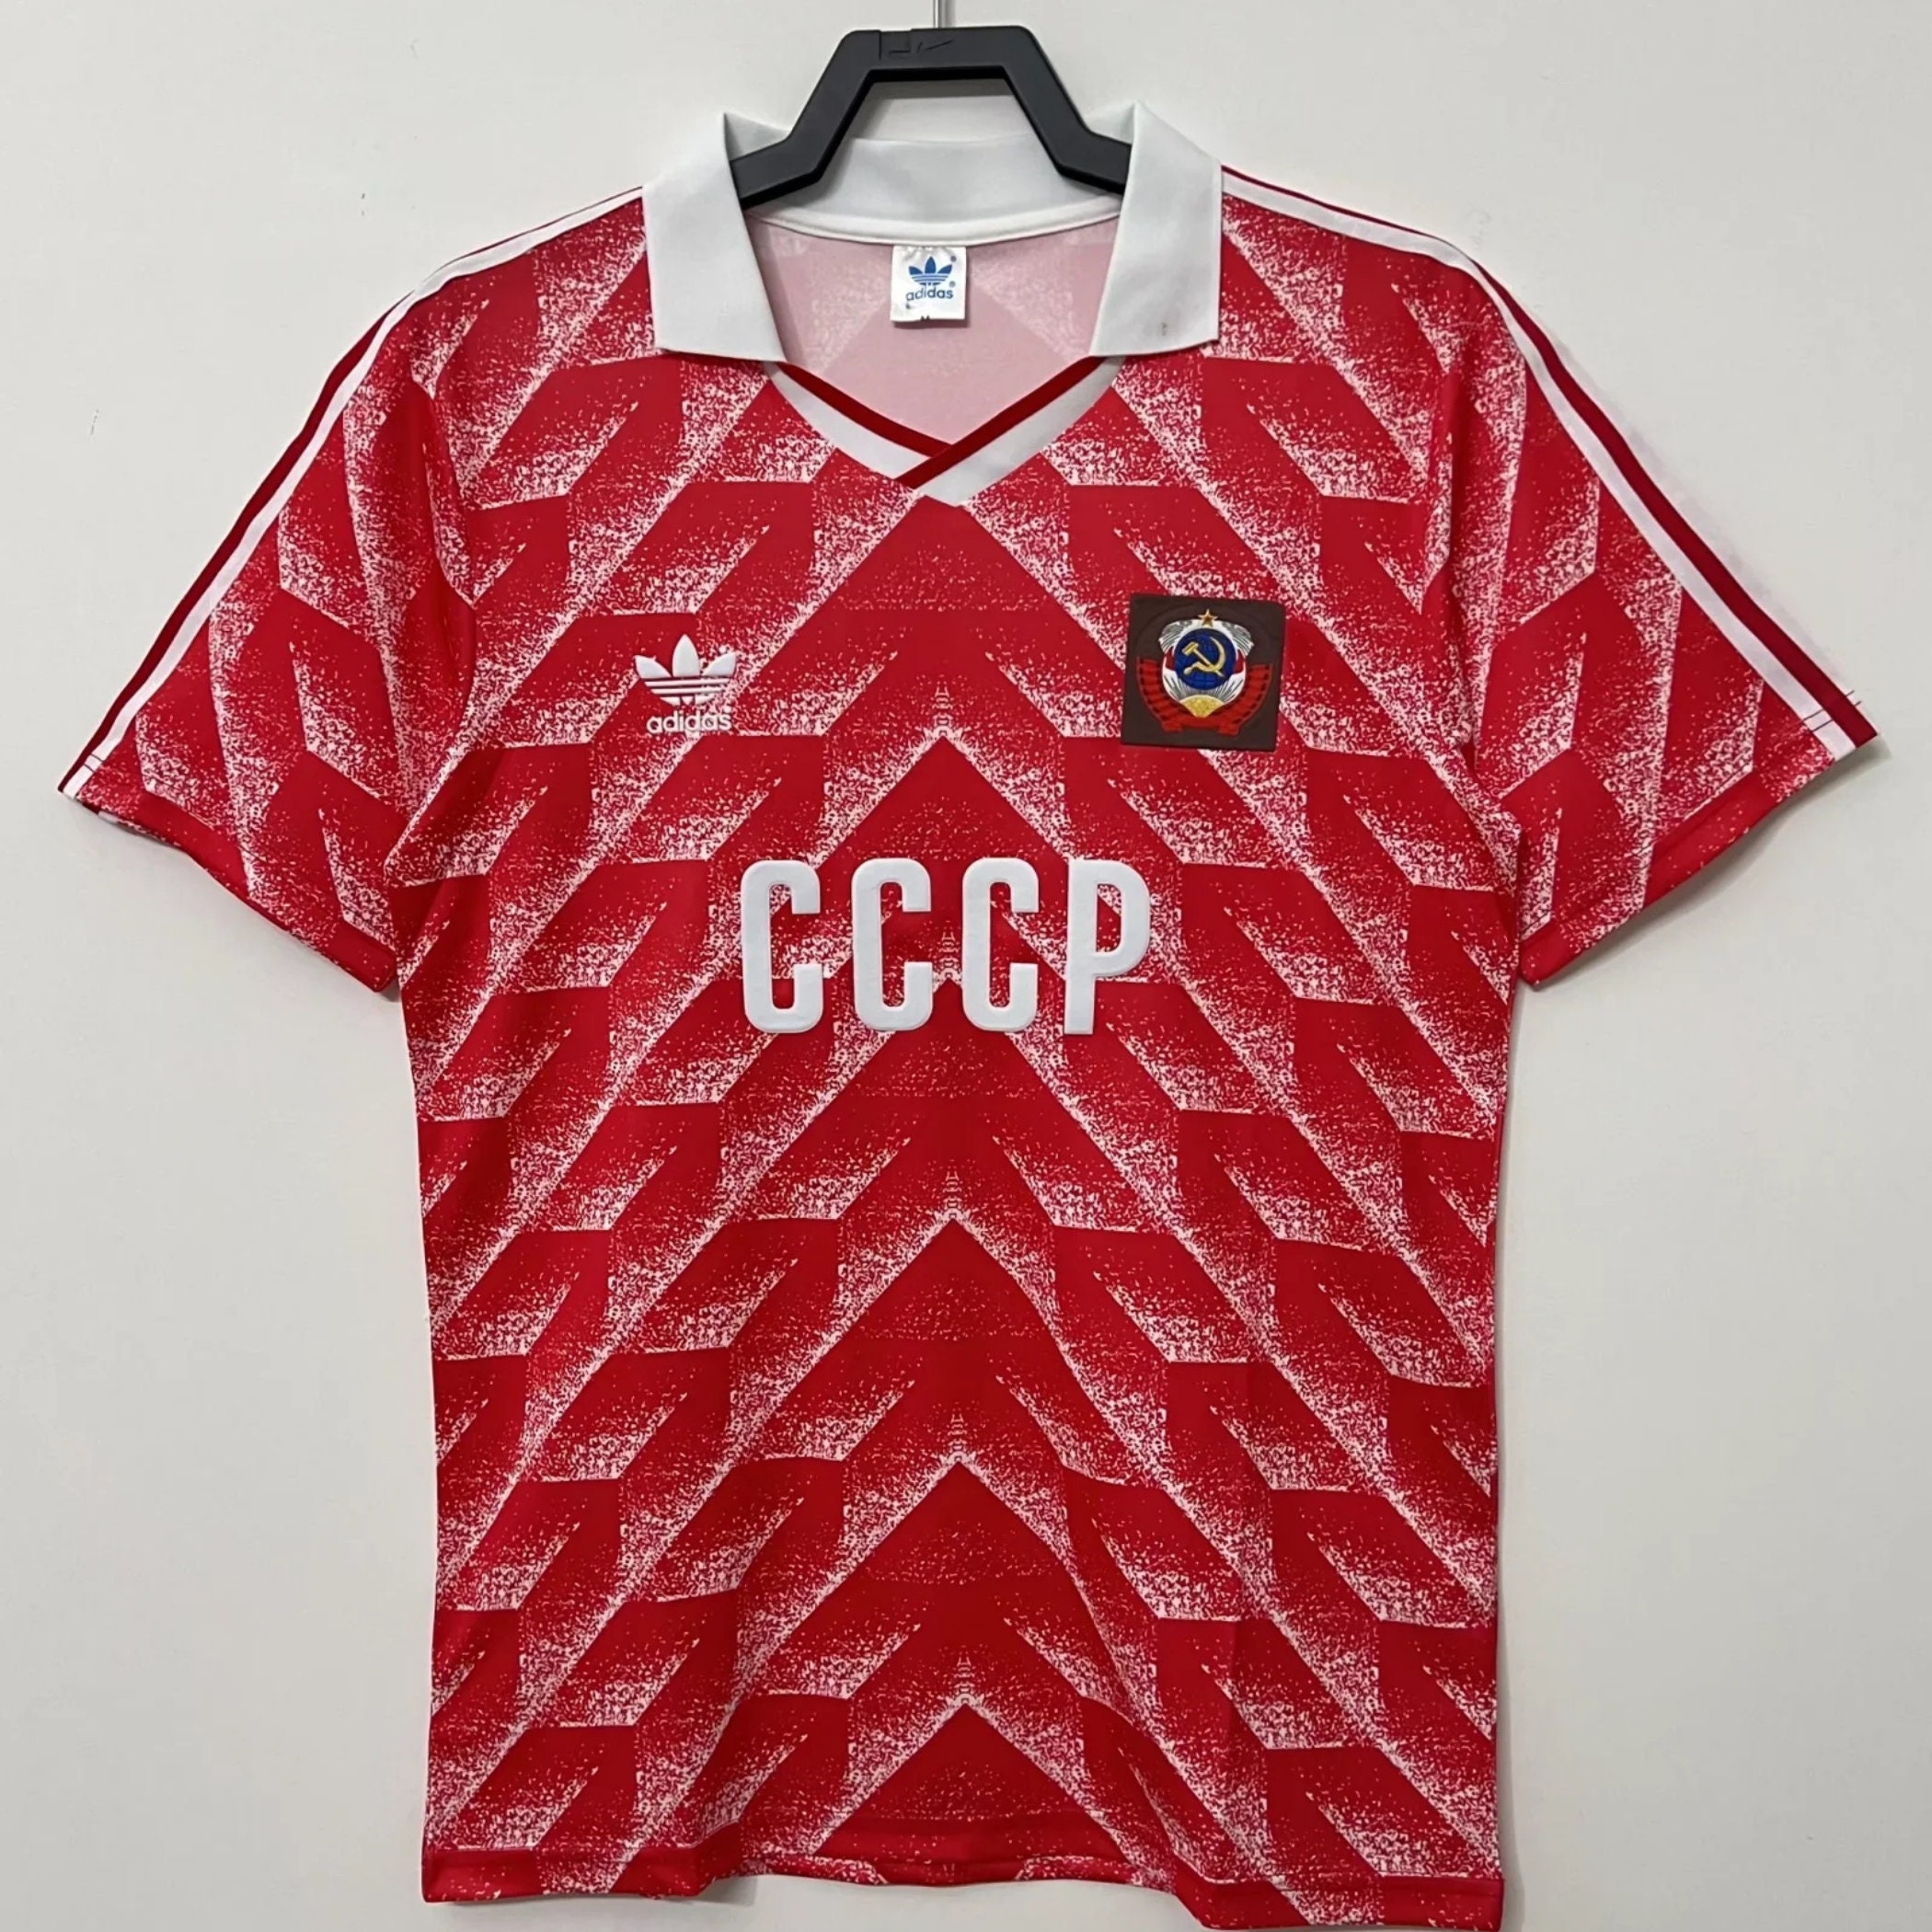 Russia Bike Jersey, CCCP Red and Yellow Jersey, classic old scholl